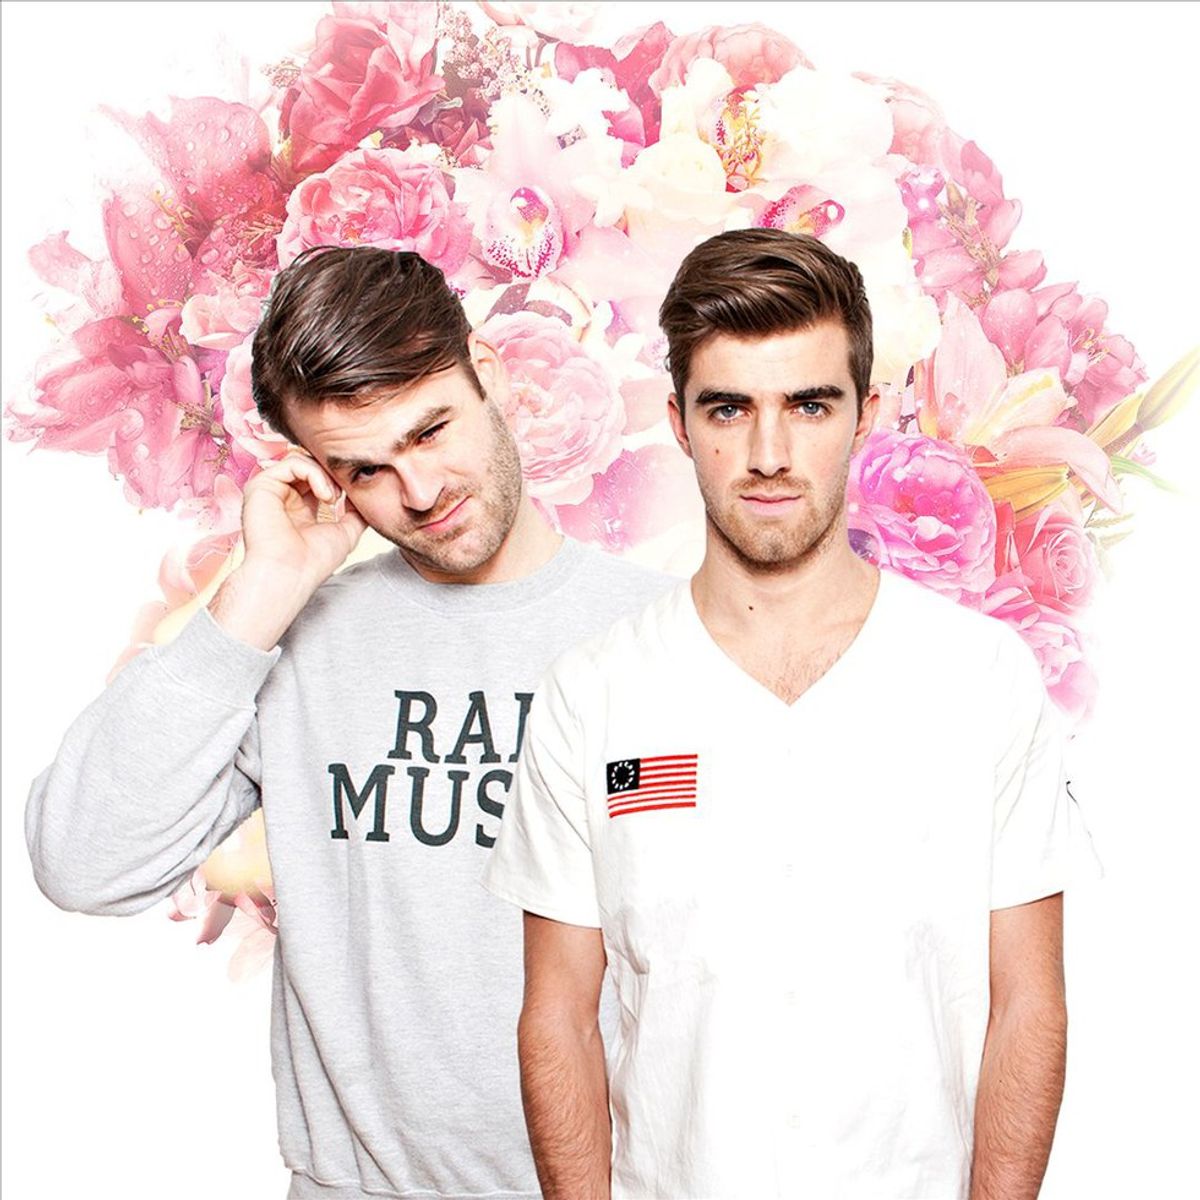 How To Create A Number One Song Like The Chainsmokers